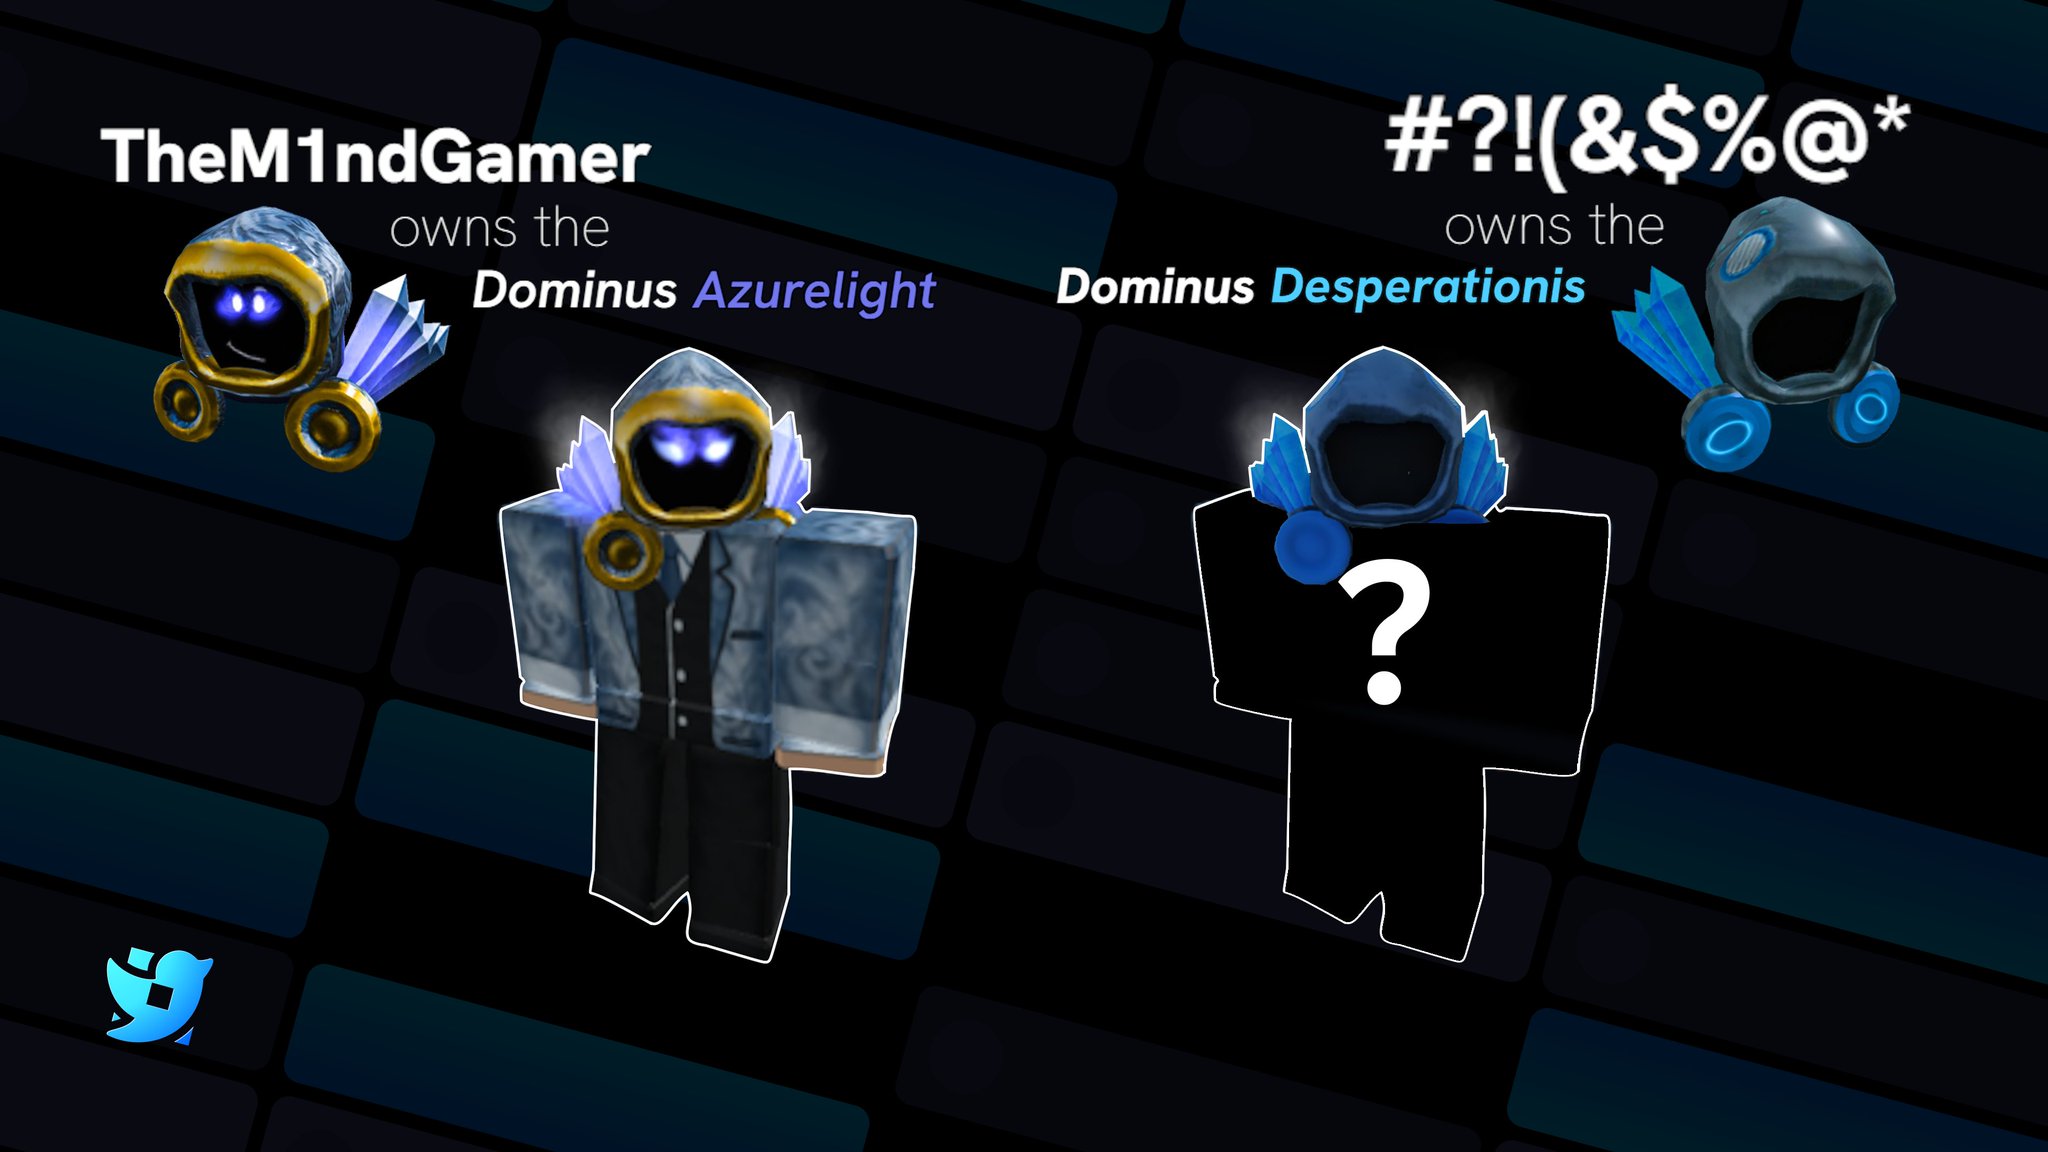 Roblox Trading News  Rolimon's on X: Roblox has just published 2 new  additions to the Dominus Series - Dominus Azurelight & Desperationis. The  context around what they are for is currently